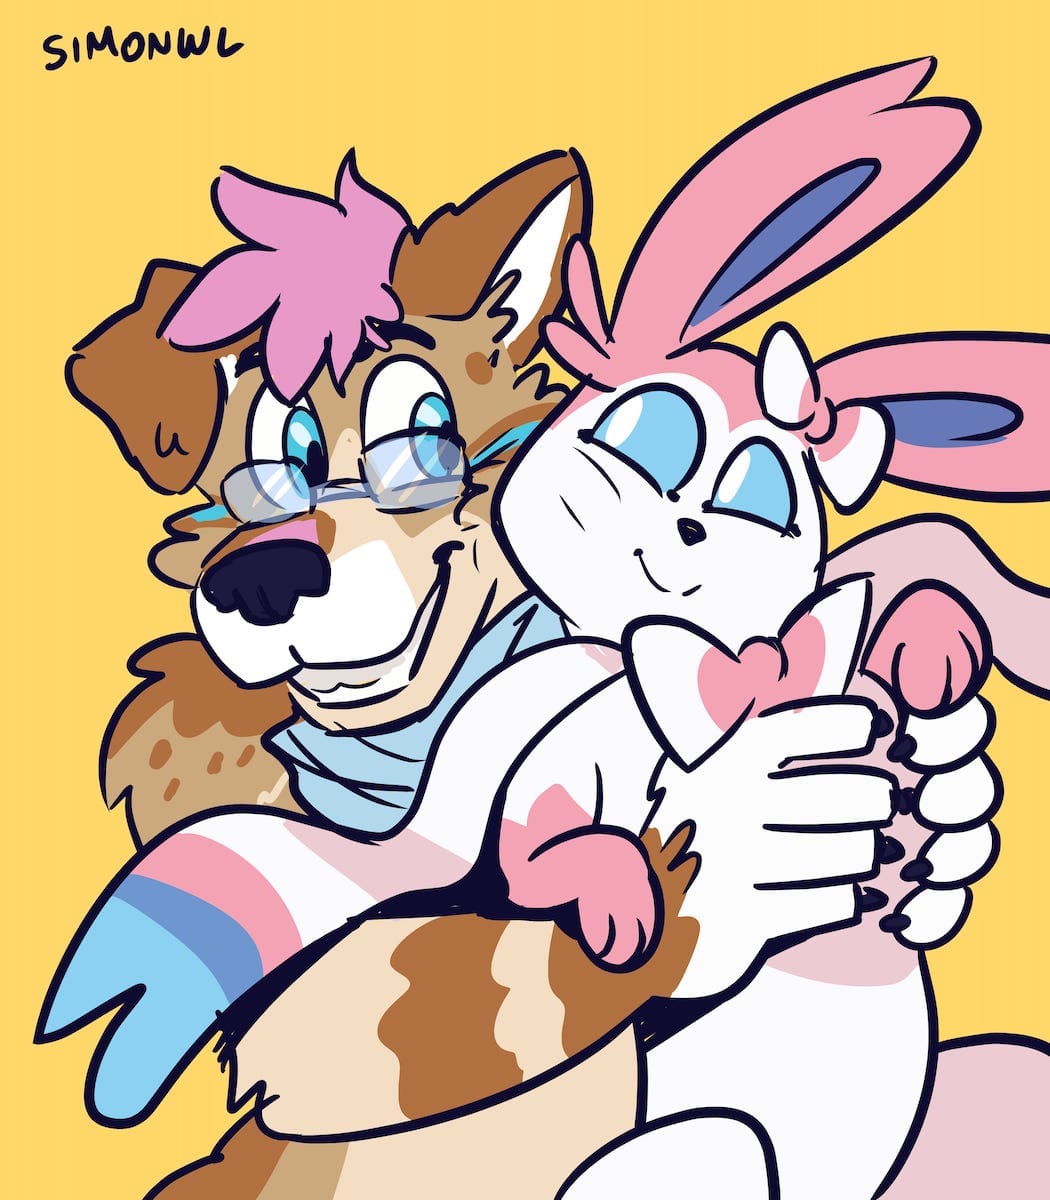 A drawing of Bowie smiling and holding up a smiling Sylveon by Simon WL